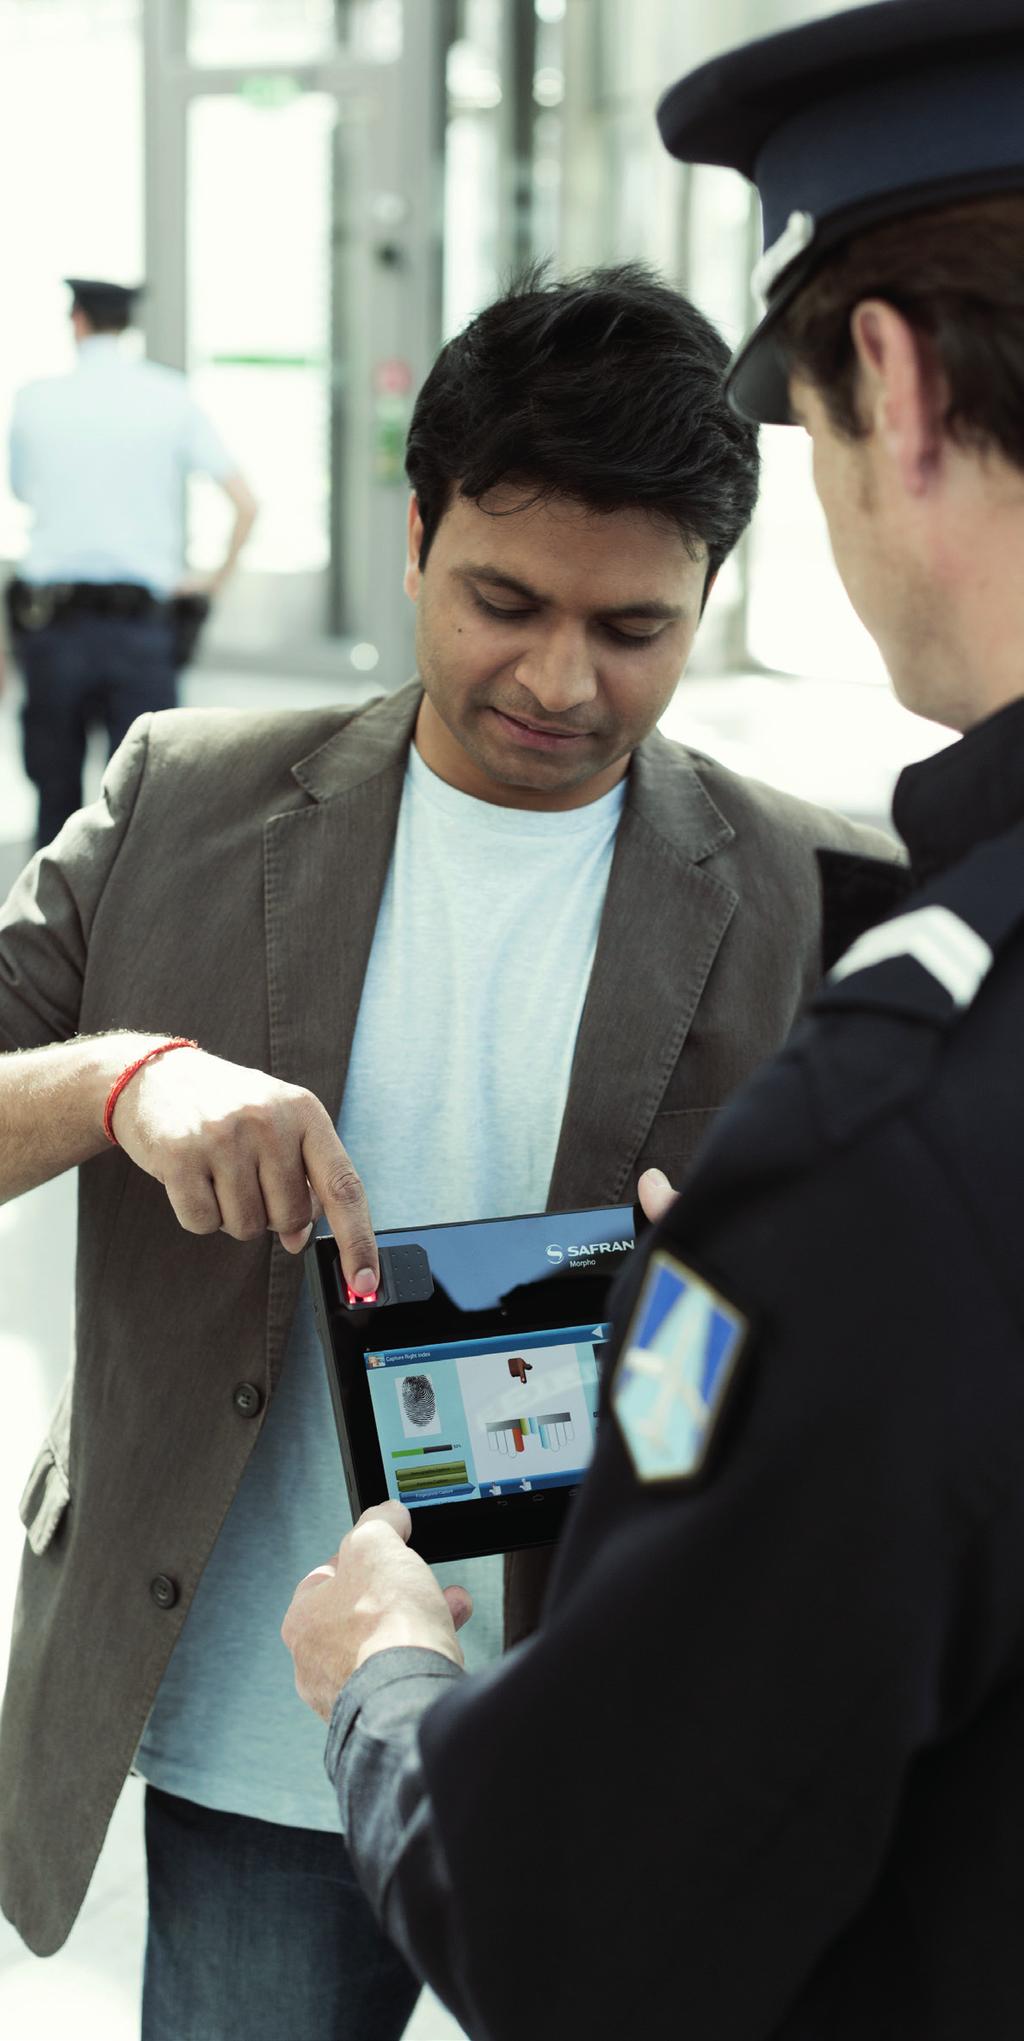 PUBLIC SECURITY We help law enforcement and police organizations detect and identify potential threats in public areas to protect people and property Multi-biometric technologies based on fingerprint